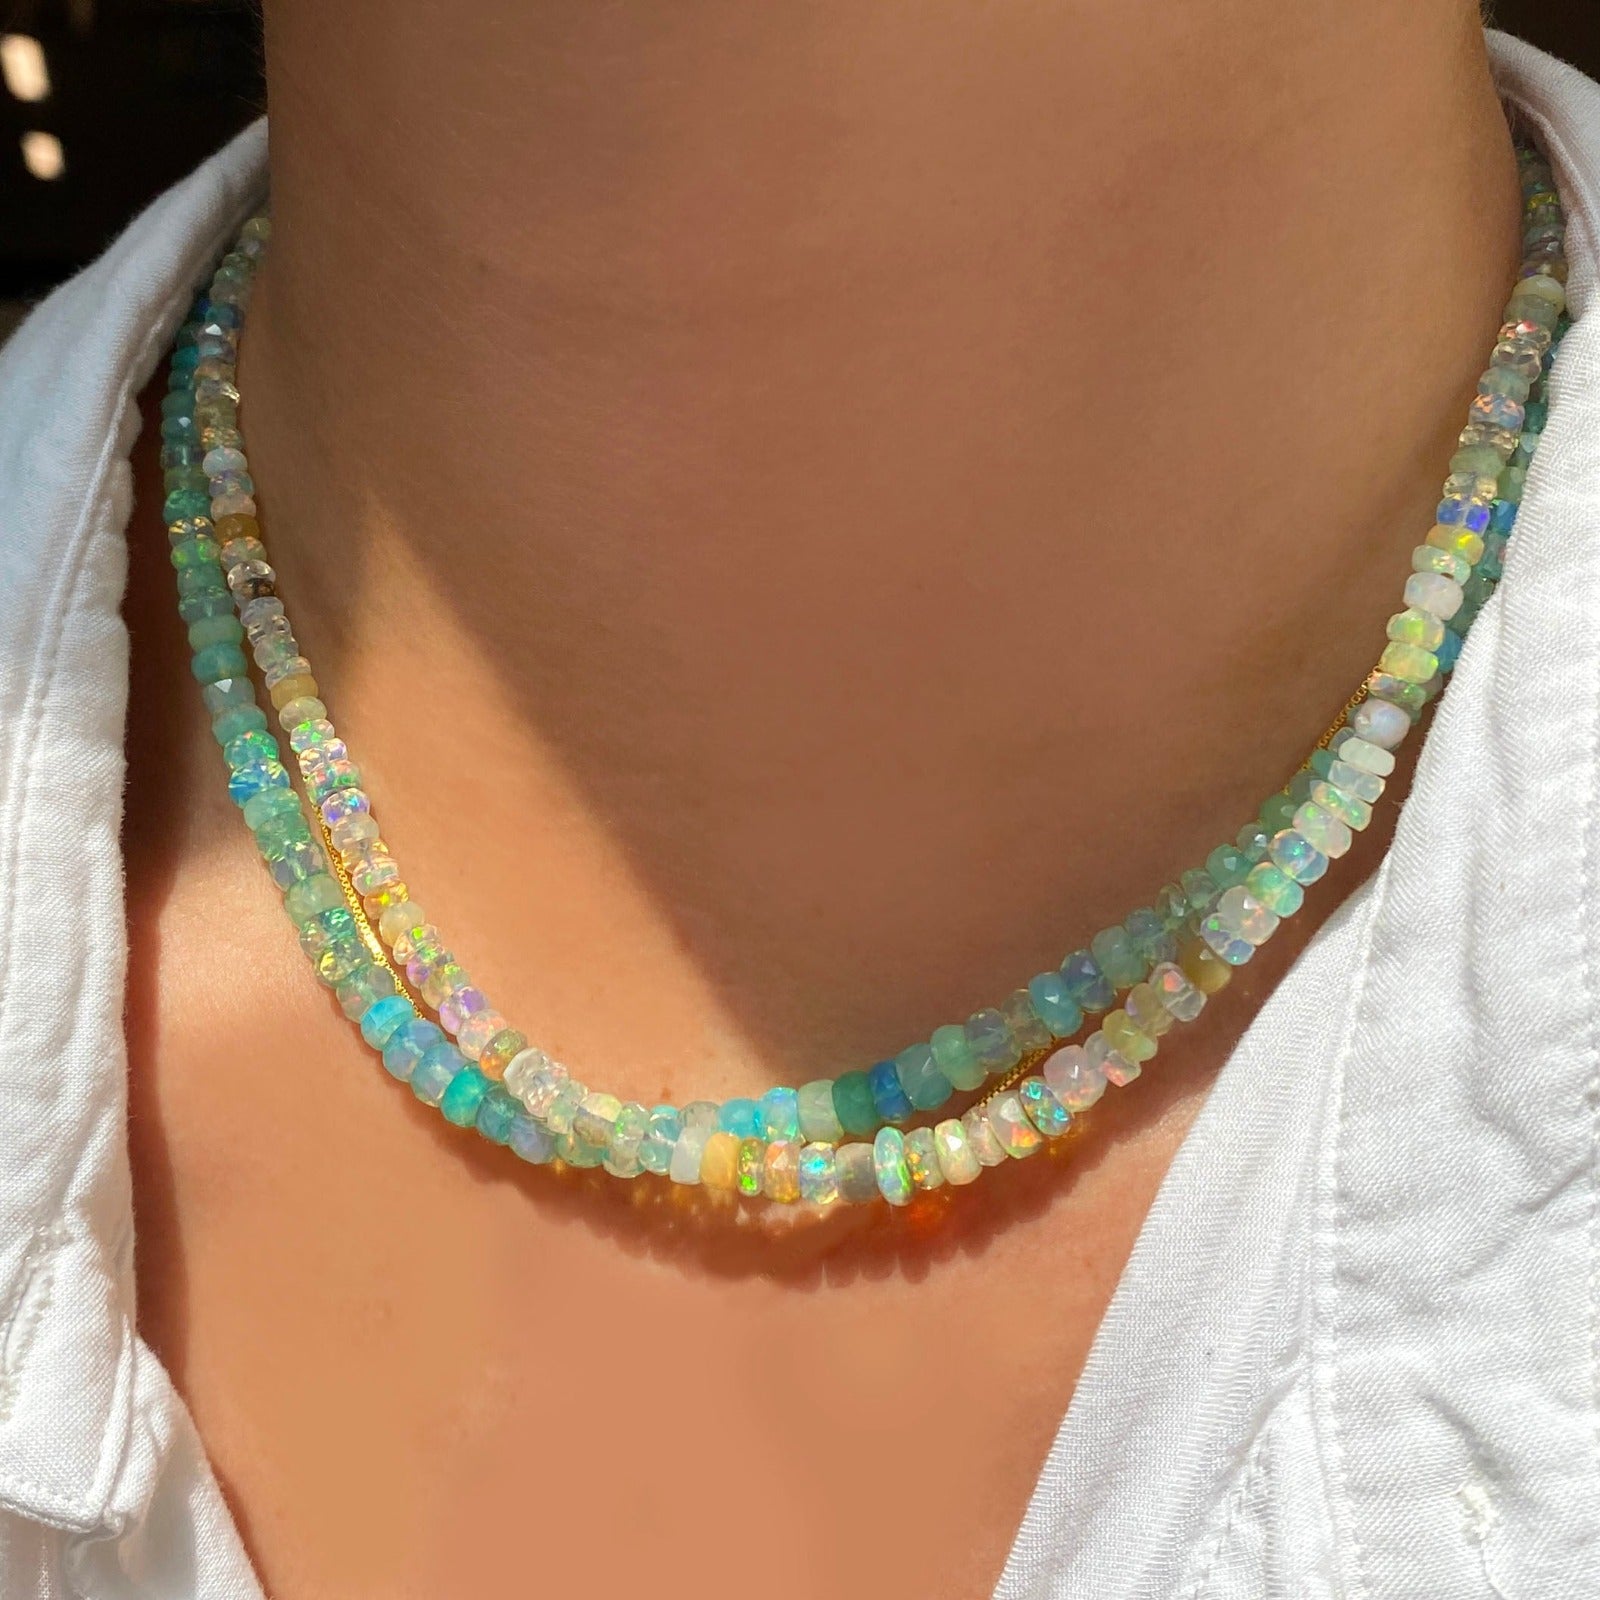 Shimmering beaded necklace made of faceted opals in shades of white, clear, and yellow on a gold linking ovals clasp. 